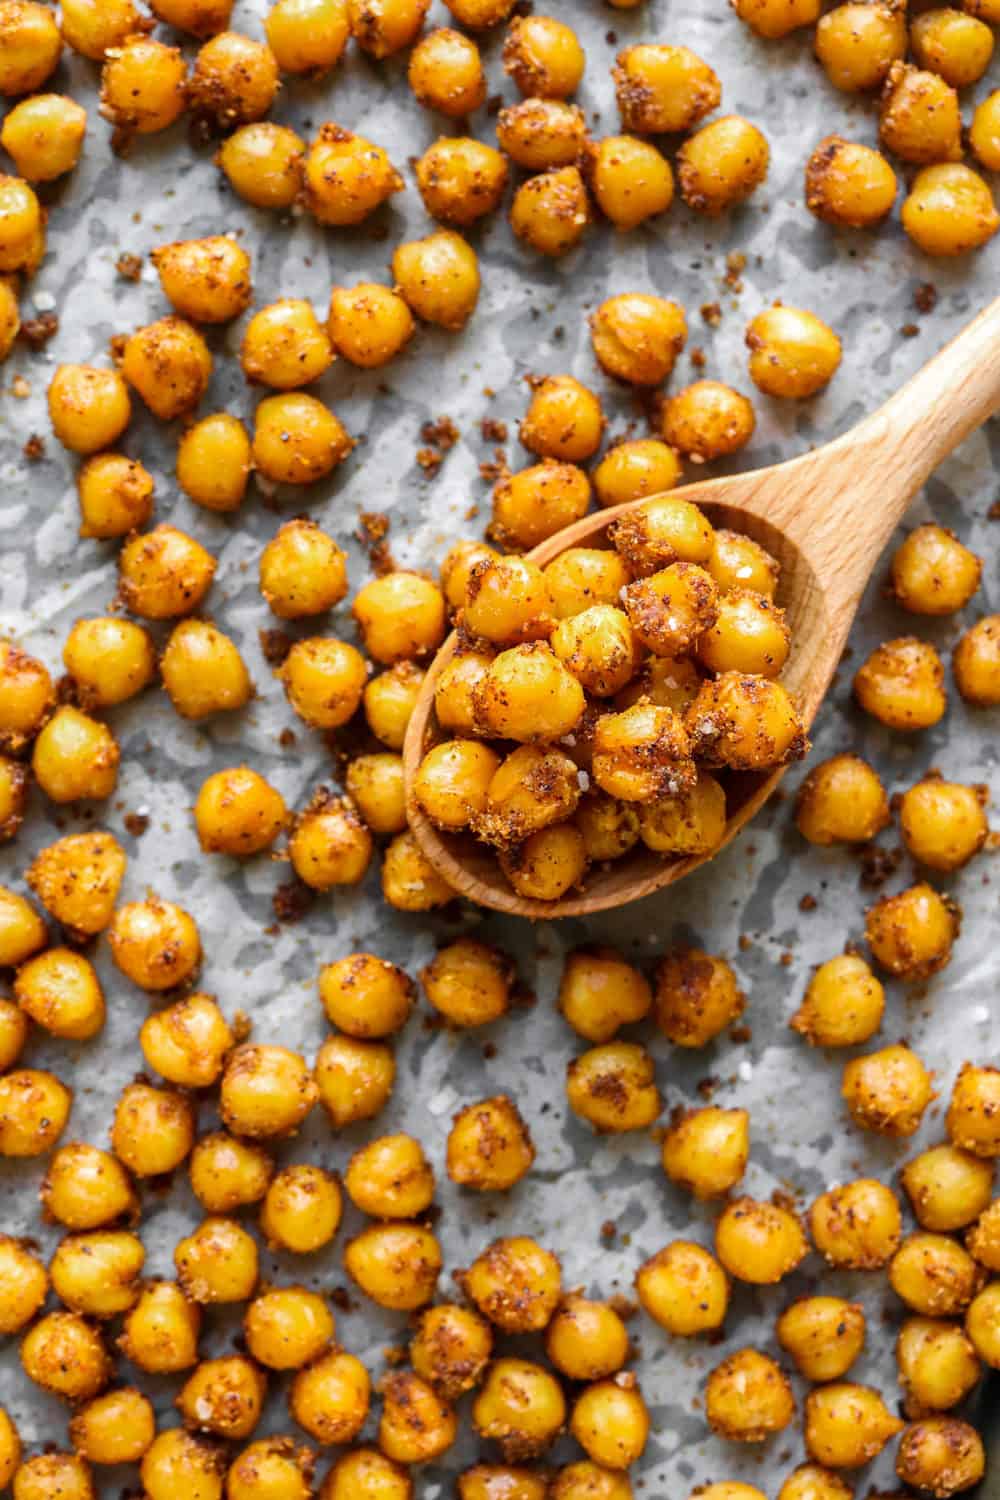 Chickpeas on a sheet pan with a wooden spoon on it